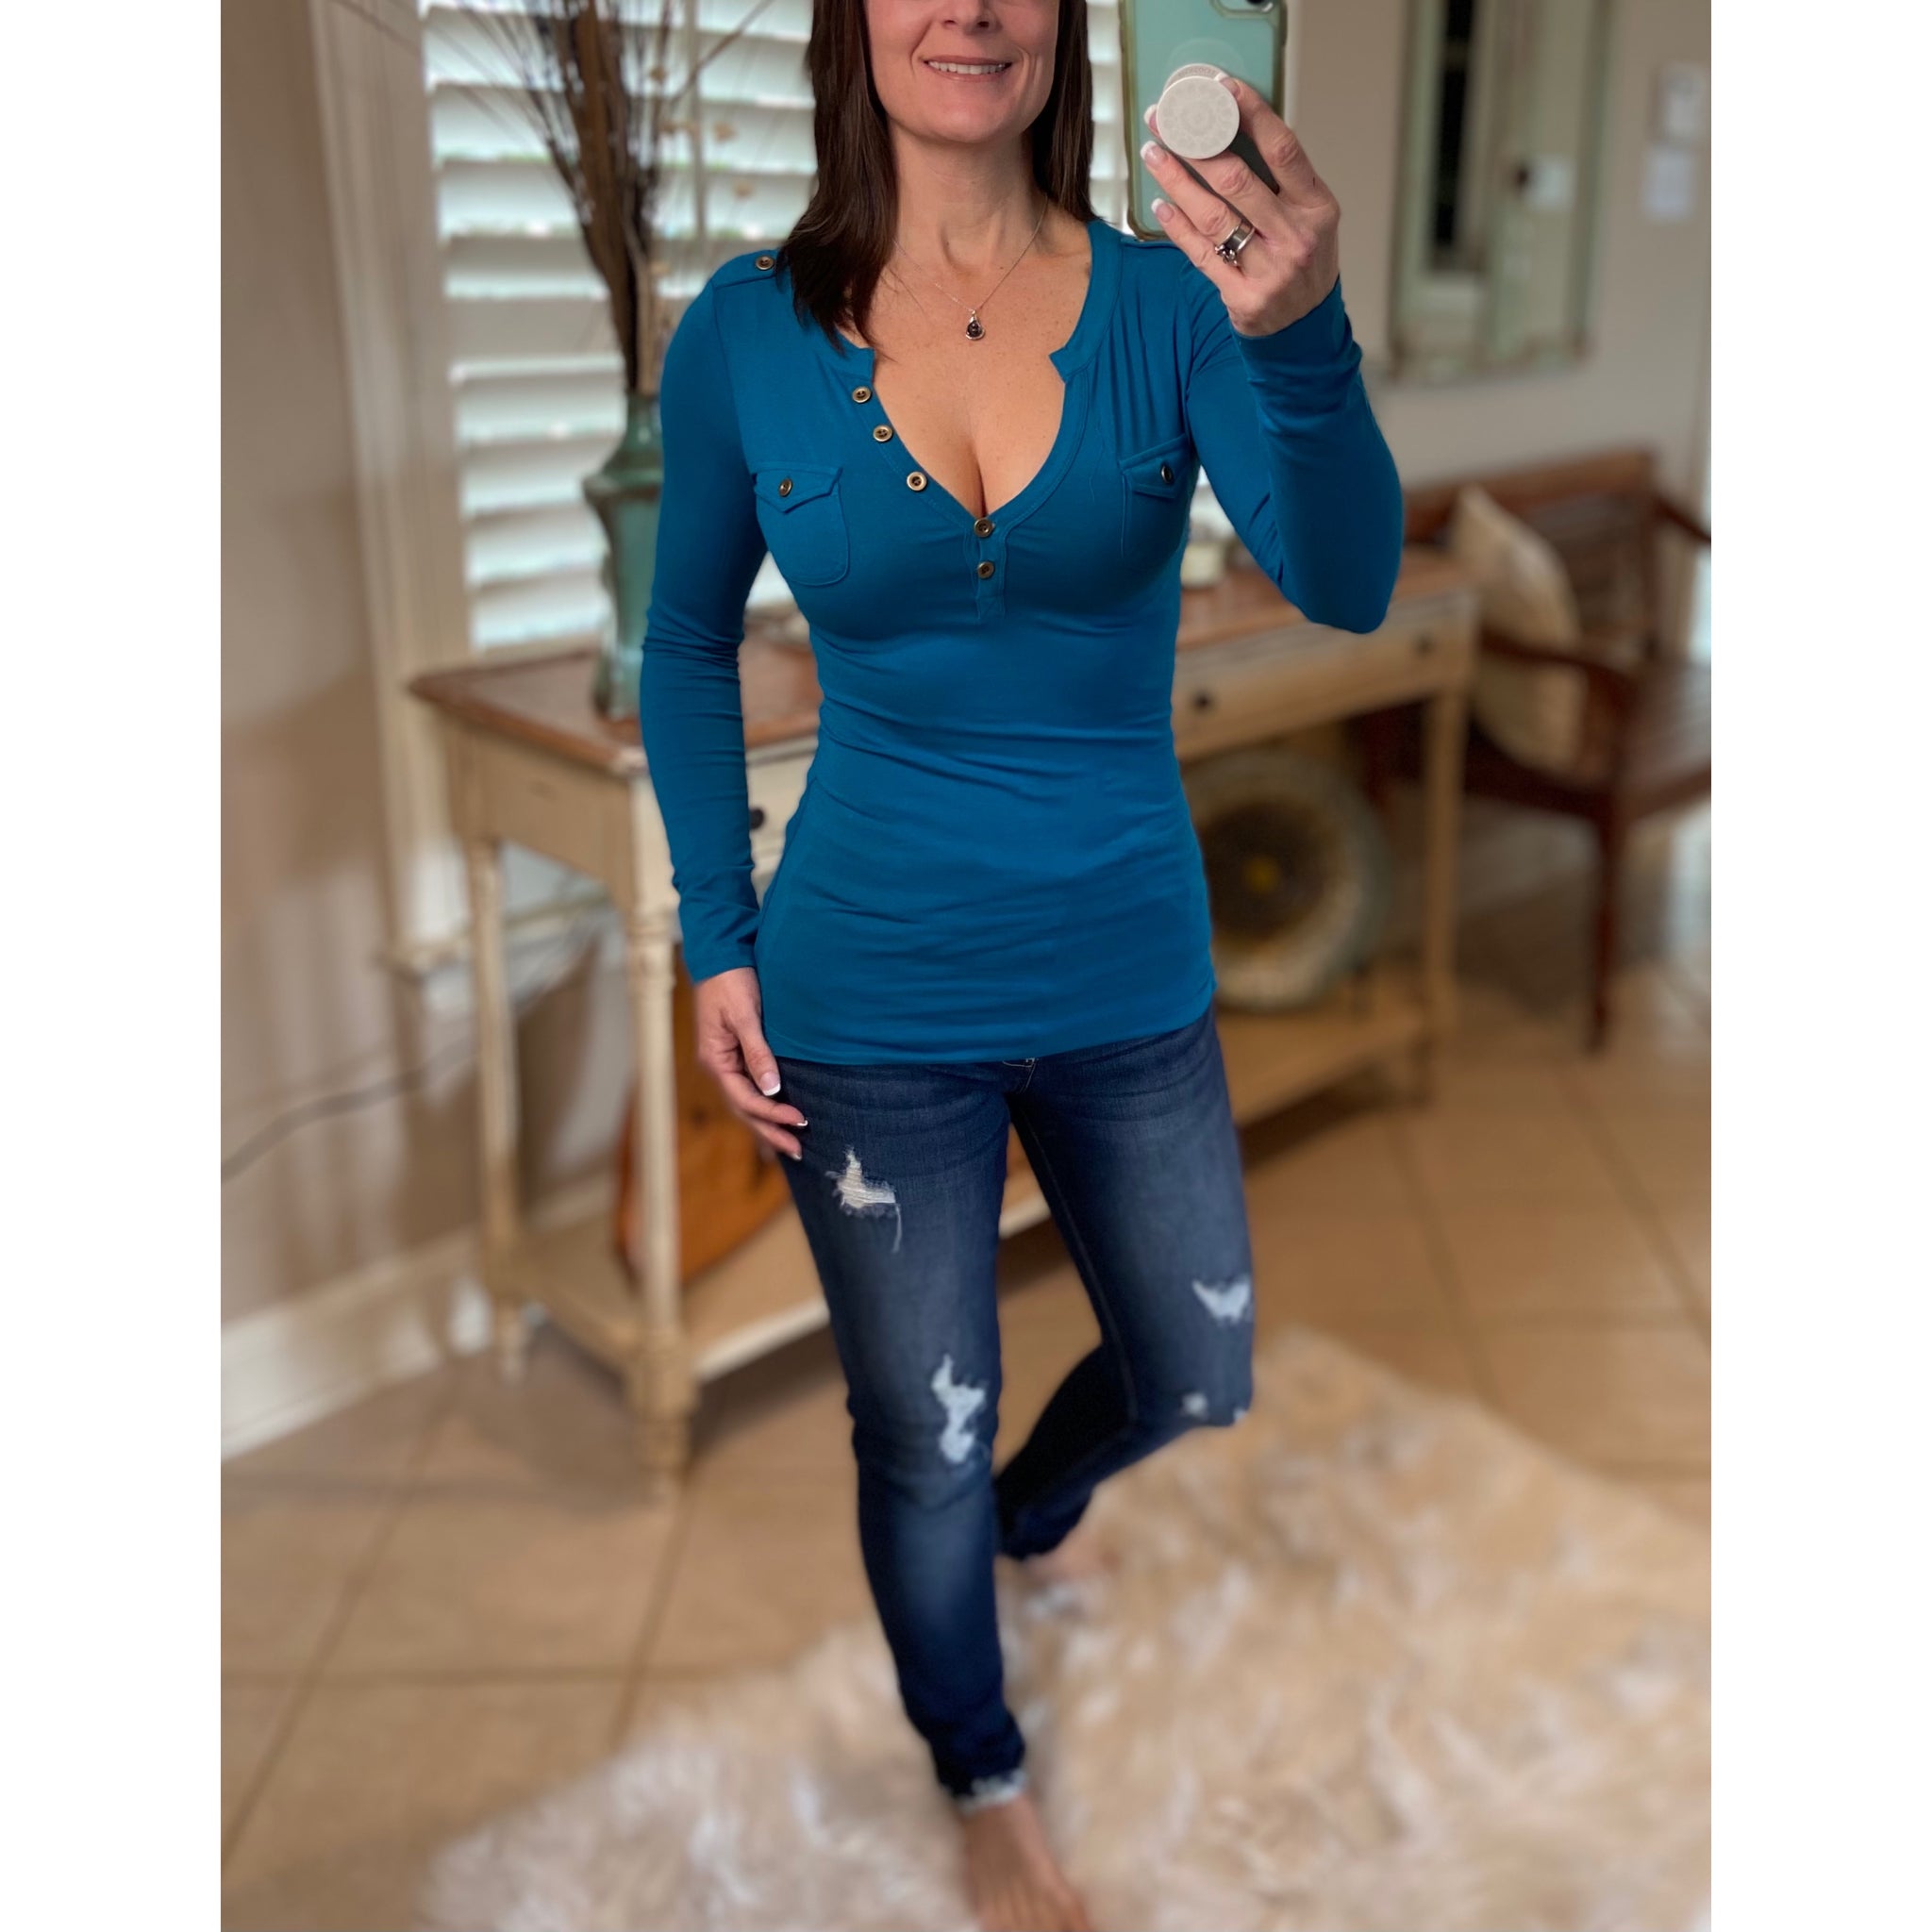 Sexy Deep V Neck Plunge Cleavage Military Henley Pocket Long Sleeve Top Teal